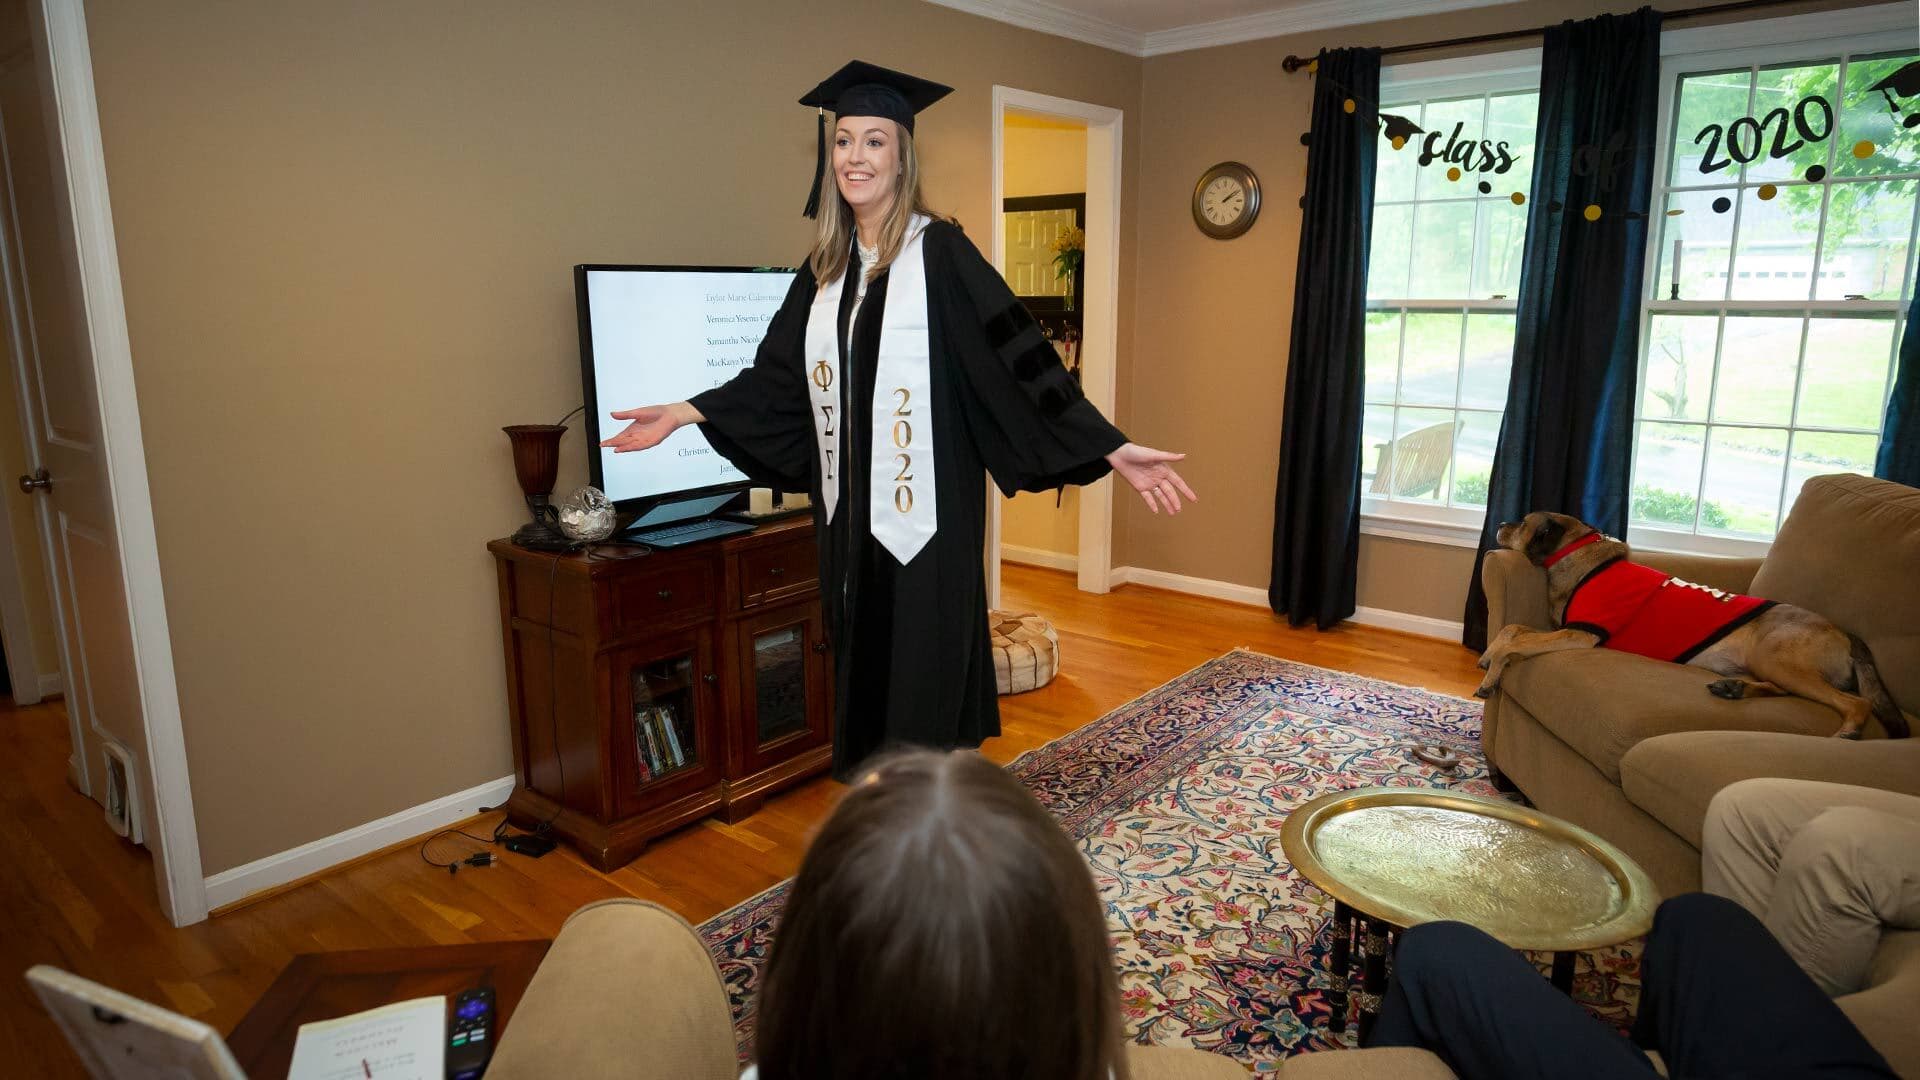 Her family's Silver Spring, Md., living room serves as a virtual stage as Lindsey Collins '20 receives her bachelor of arts in journalism today. Afterward, she and her dog, Leo, share a high-five.